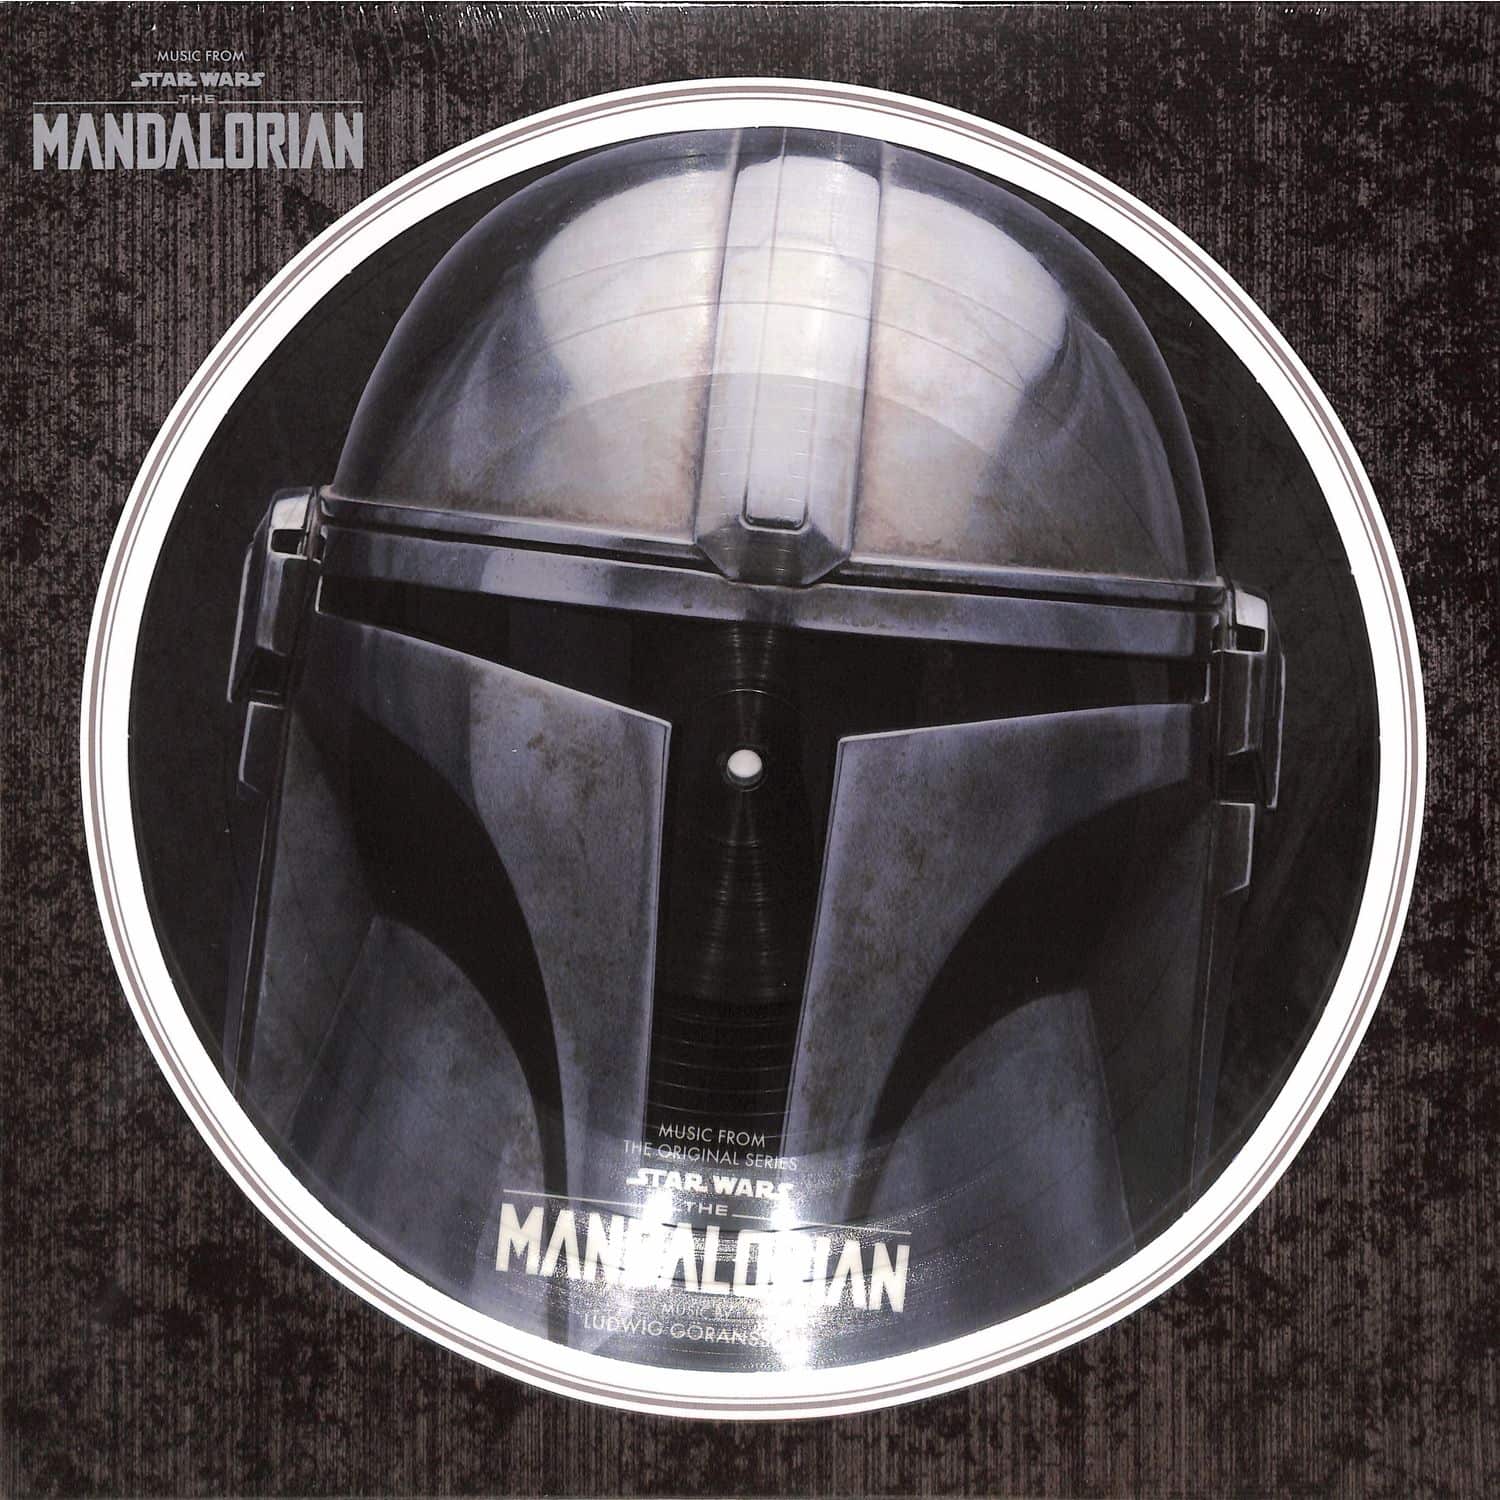 OST / Ludwig Gransson - MUSIC FROM THE MANDALORIAN 